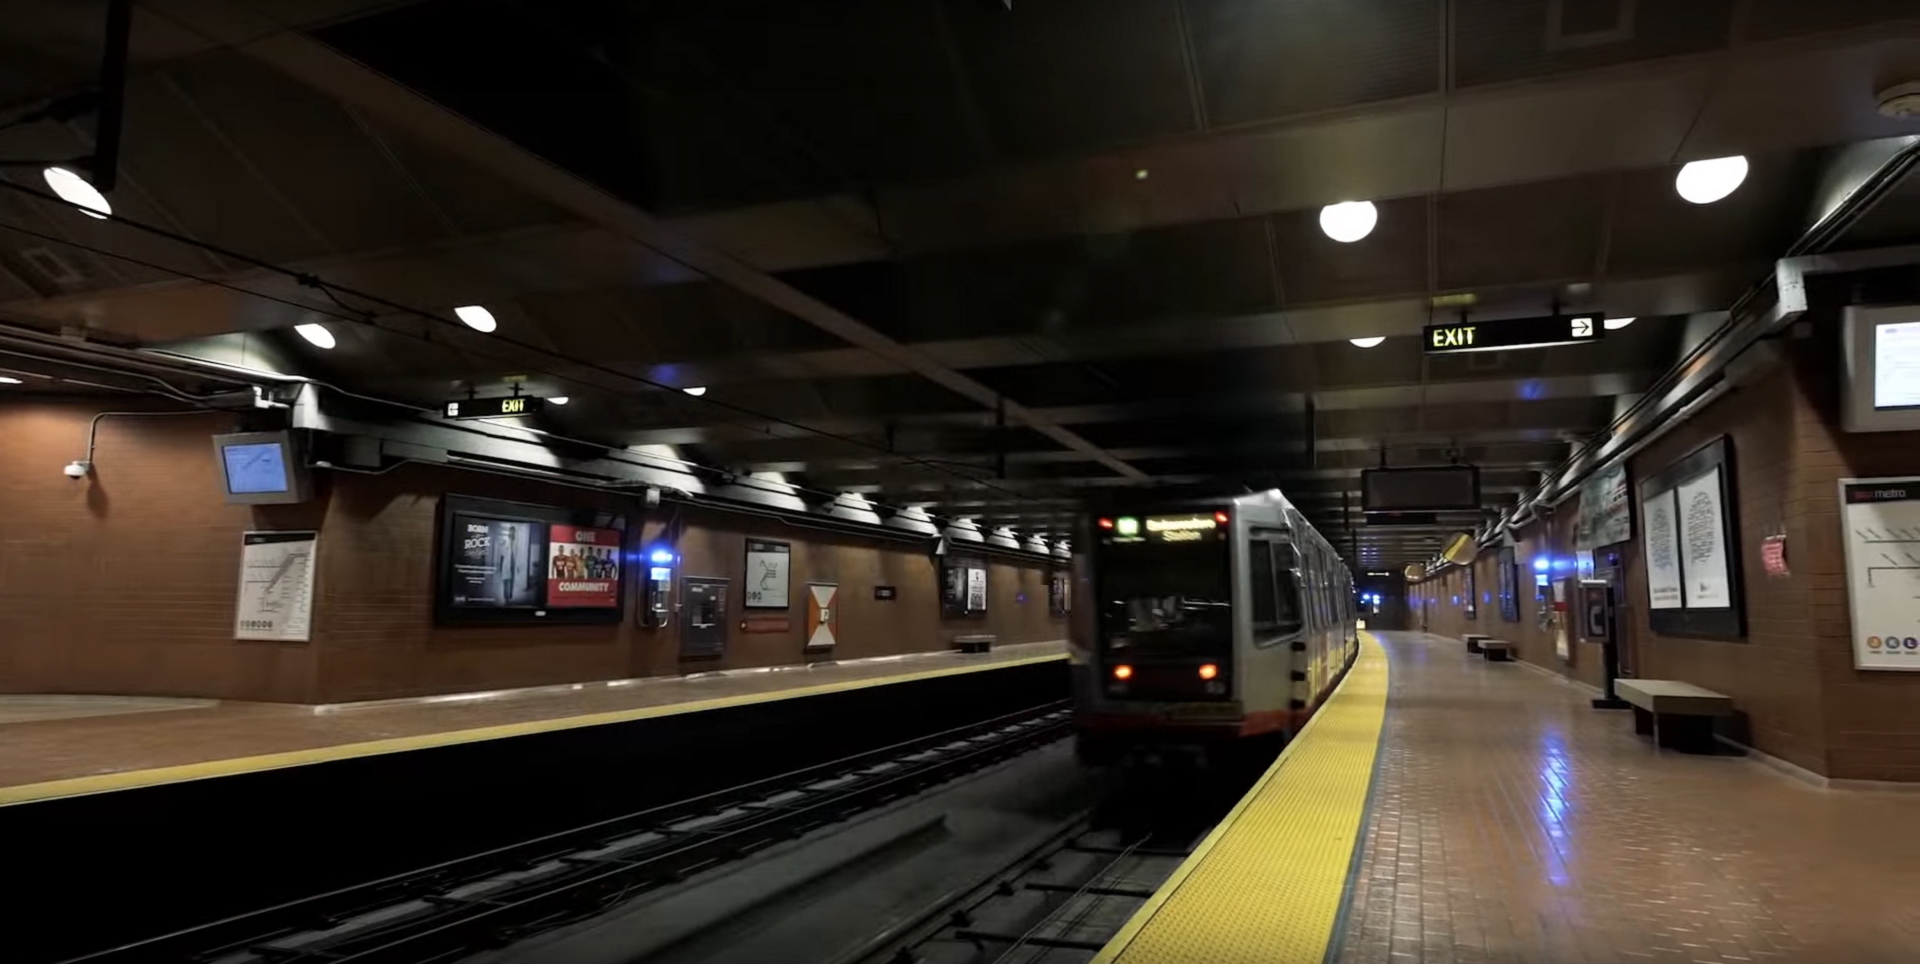 A construction worker has died after being injured while working on a renovation project inside a light rail tunnel.  <a href="https://www.sfmta.com">SFMTA</a>